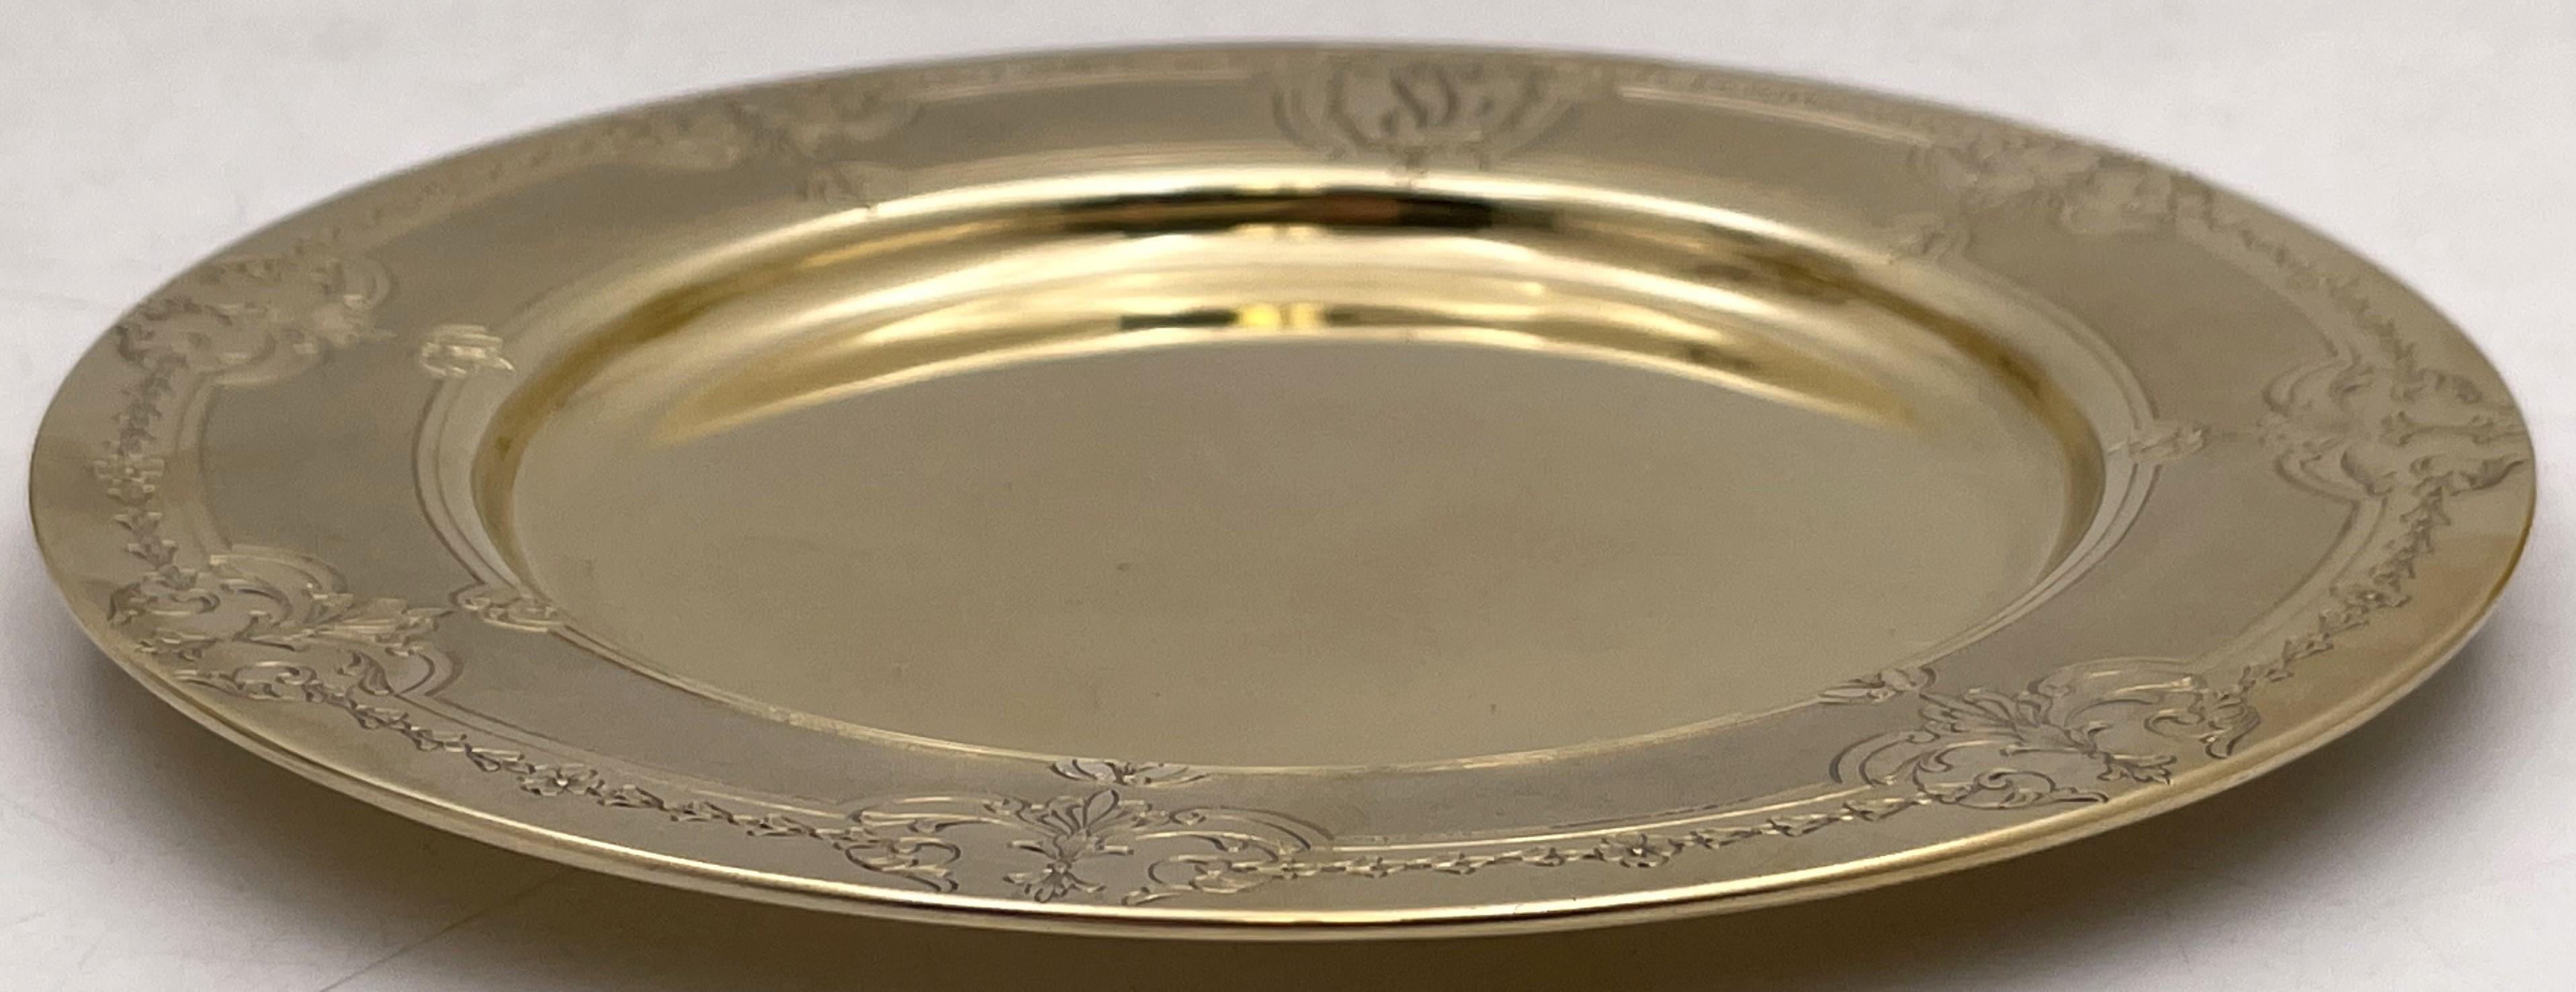 Towle Set of 15 Gilt Sterling Silver Dessert / Bread Plates Early 20th Century For Sale 2